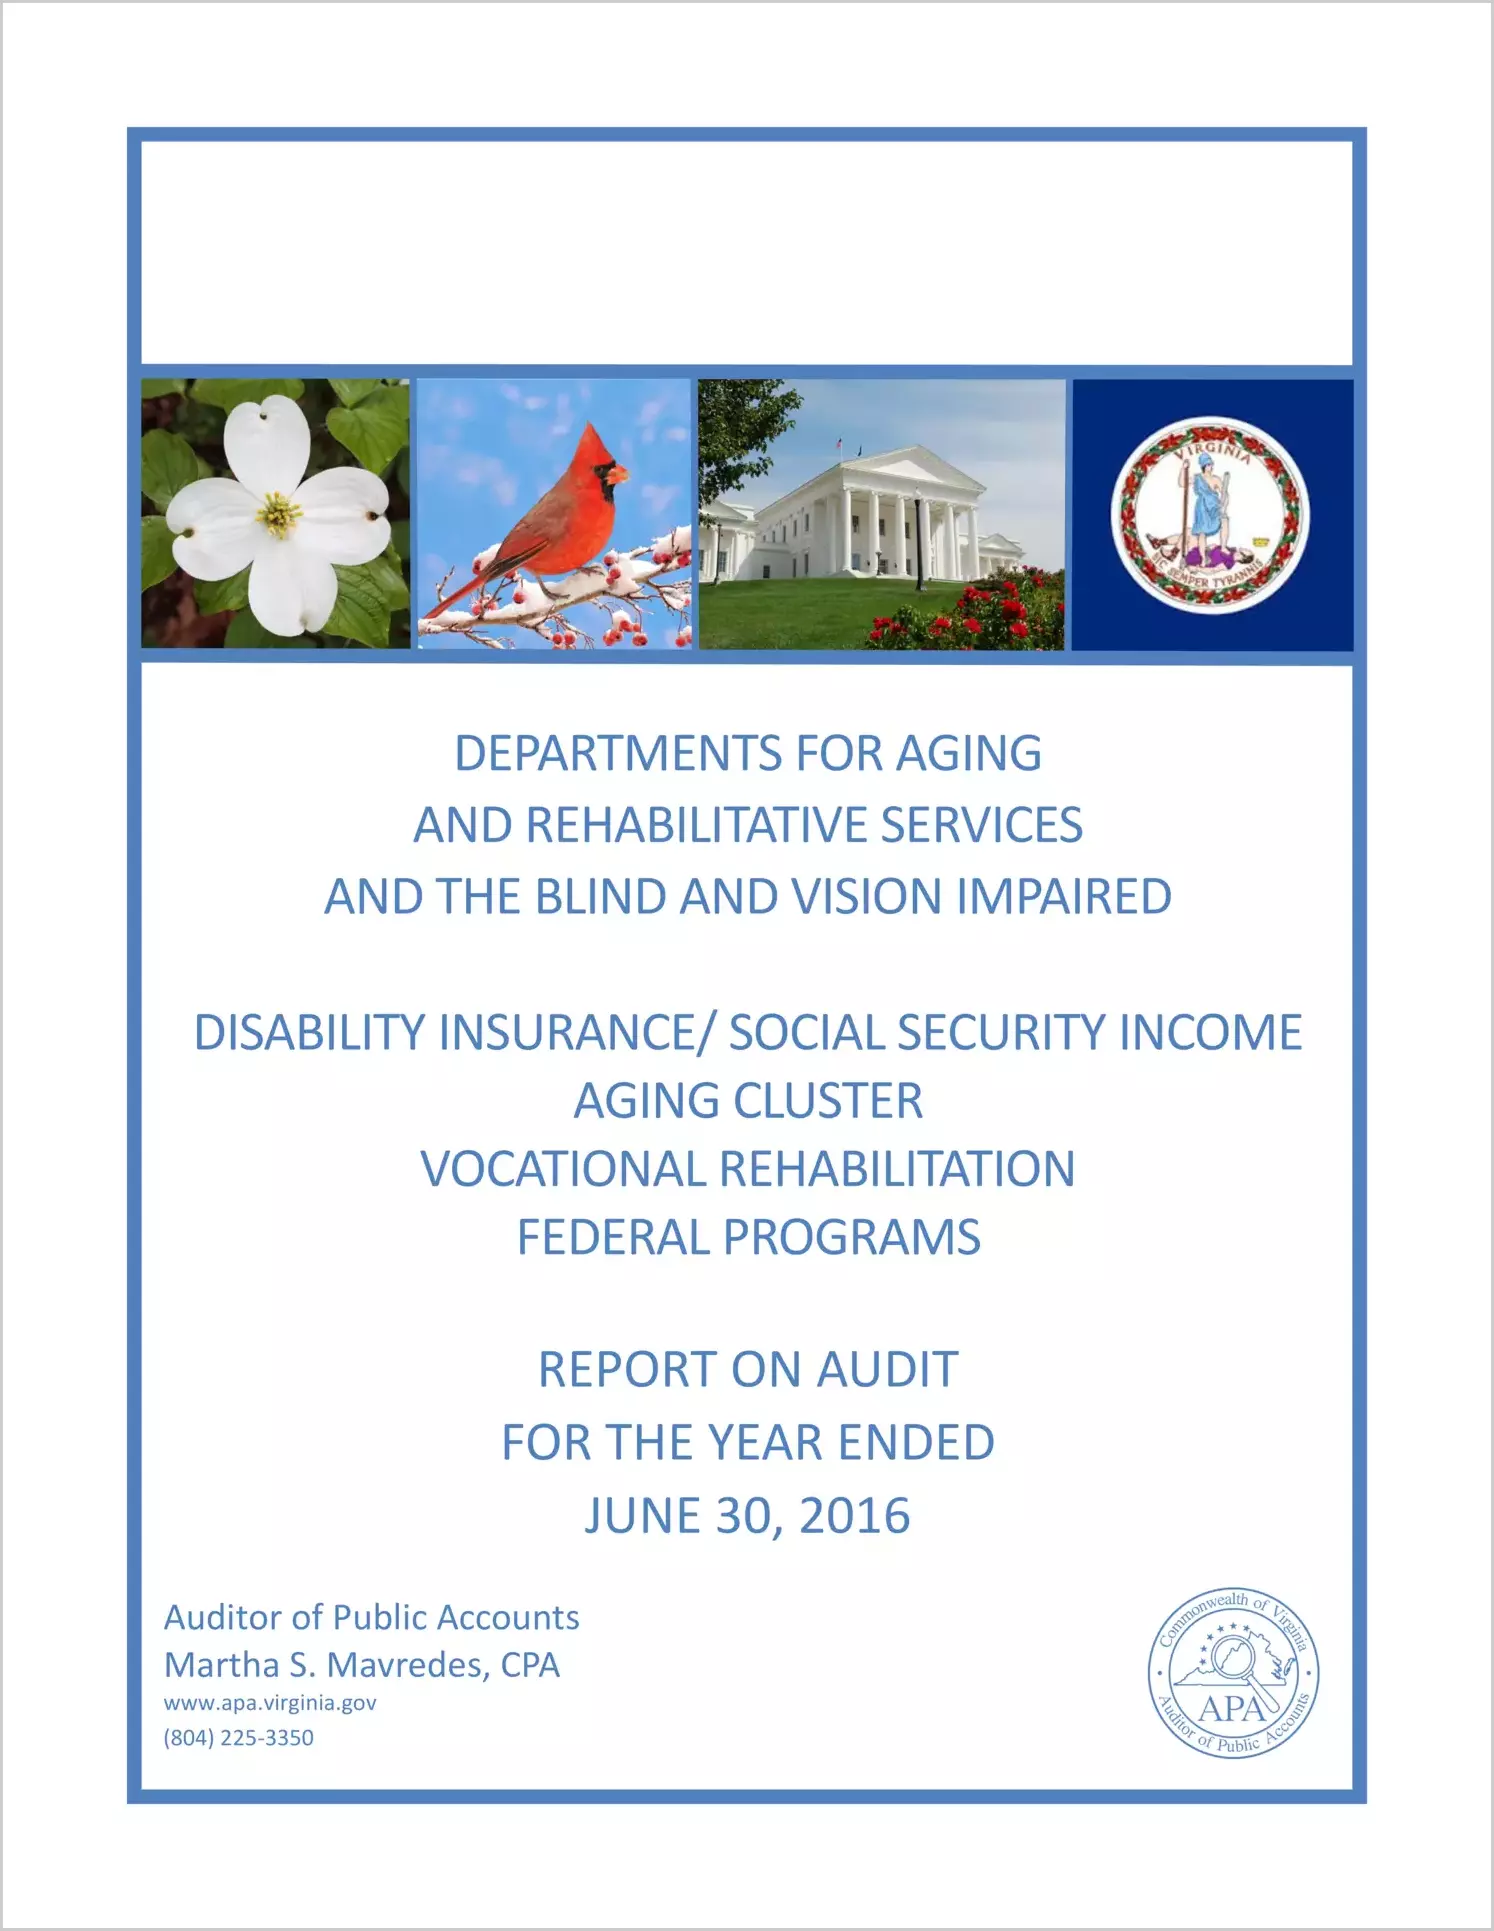 Departments for Aging and Rehabilitative Services and the Blind and Vision Impaired - Disability Insurance/Social Security Income, Aging Cluster, and the Vocational Rehabilitation federal programs for the fiscal year ended June 30, 2016